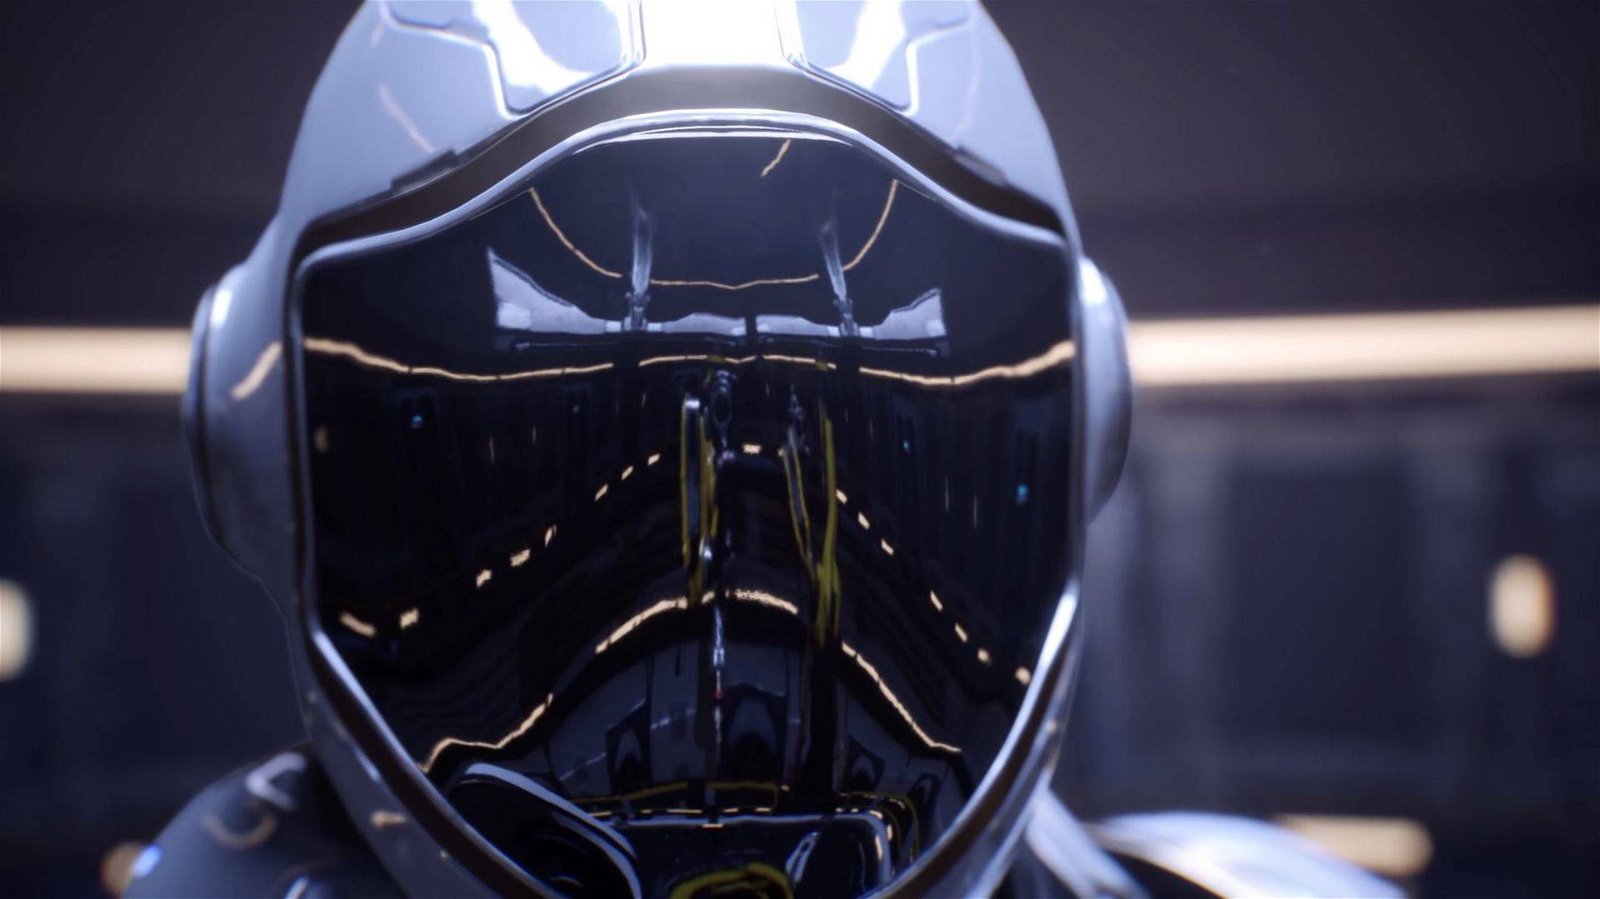 Immagine di Ray tracing in arrivo sulle Nvidia GeForce GTX Pascal e Turing